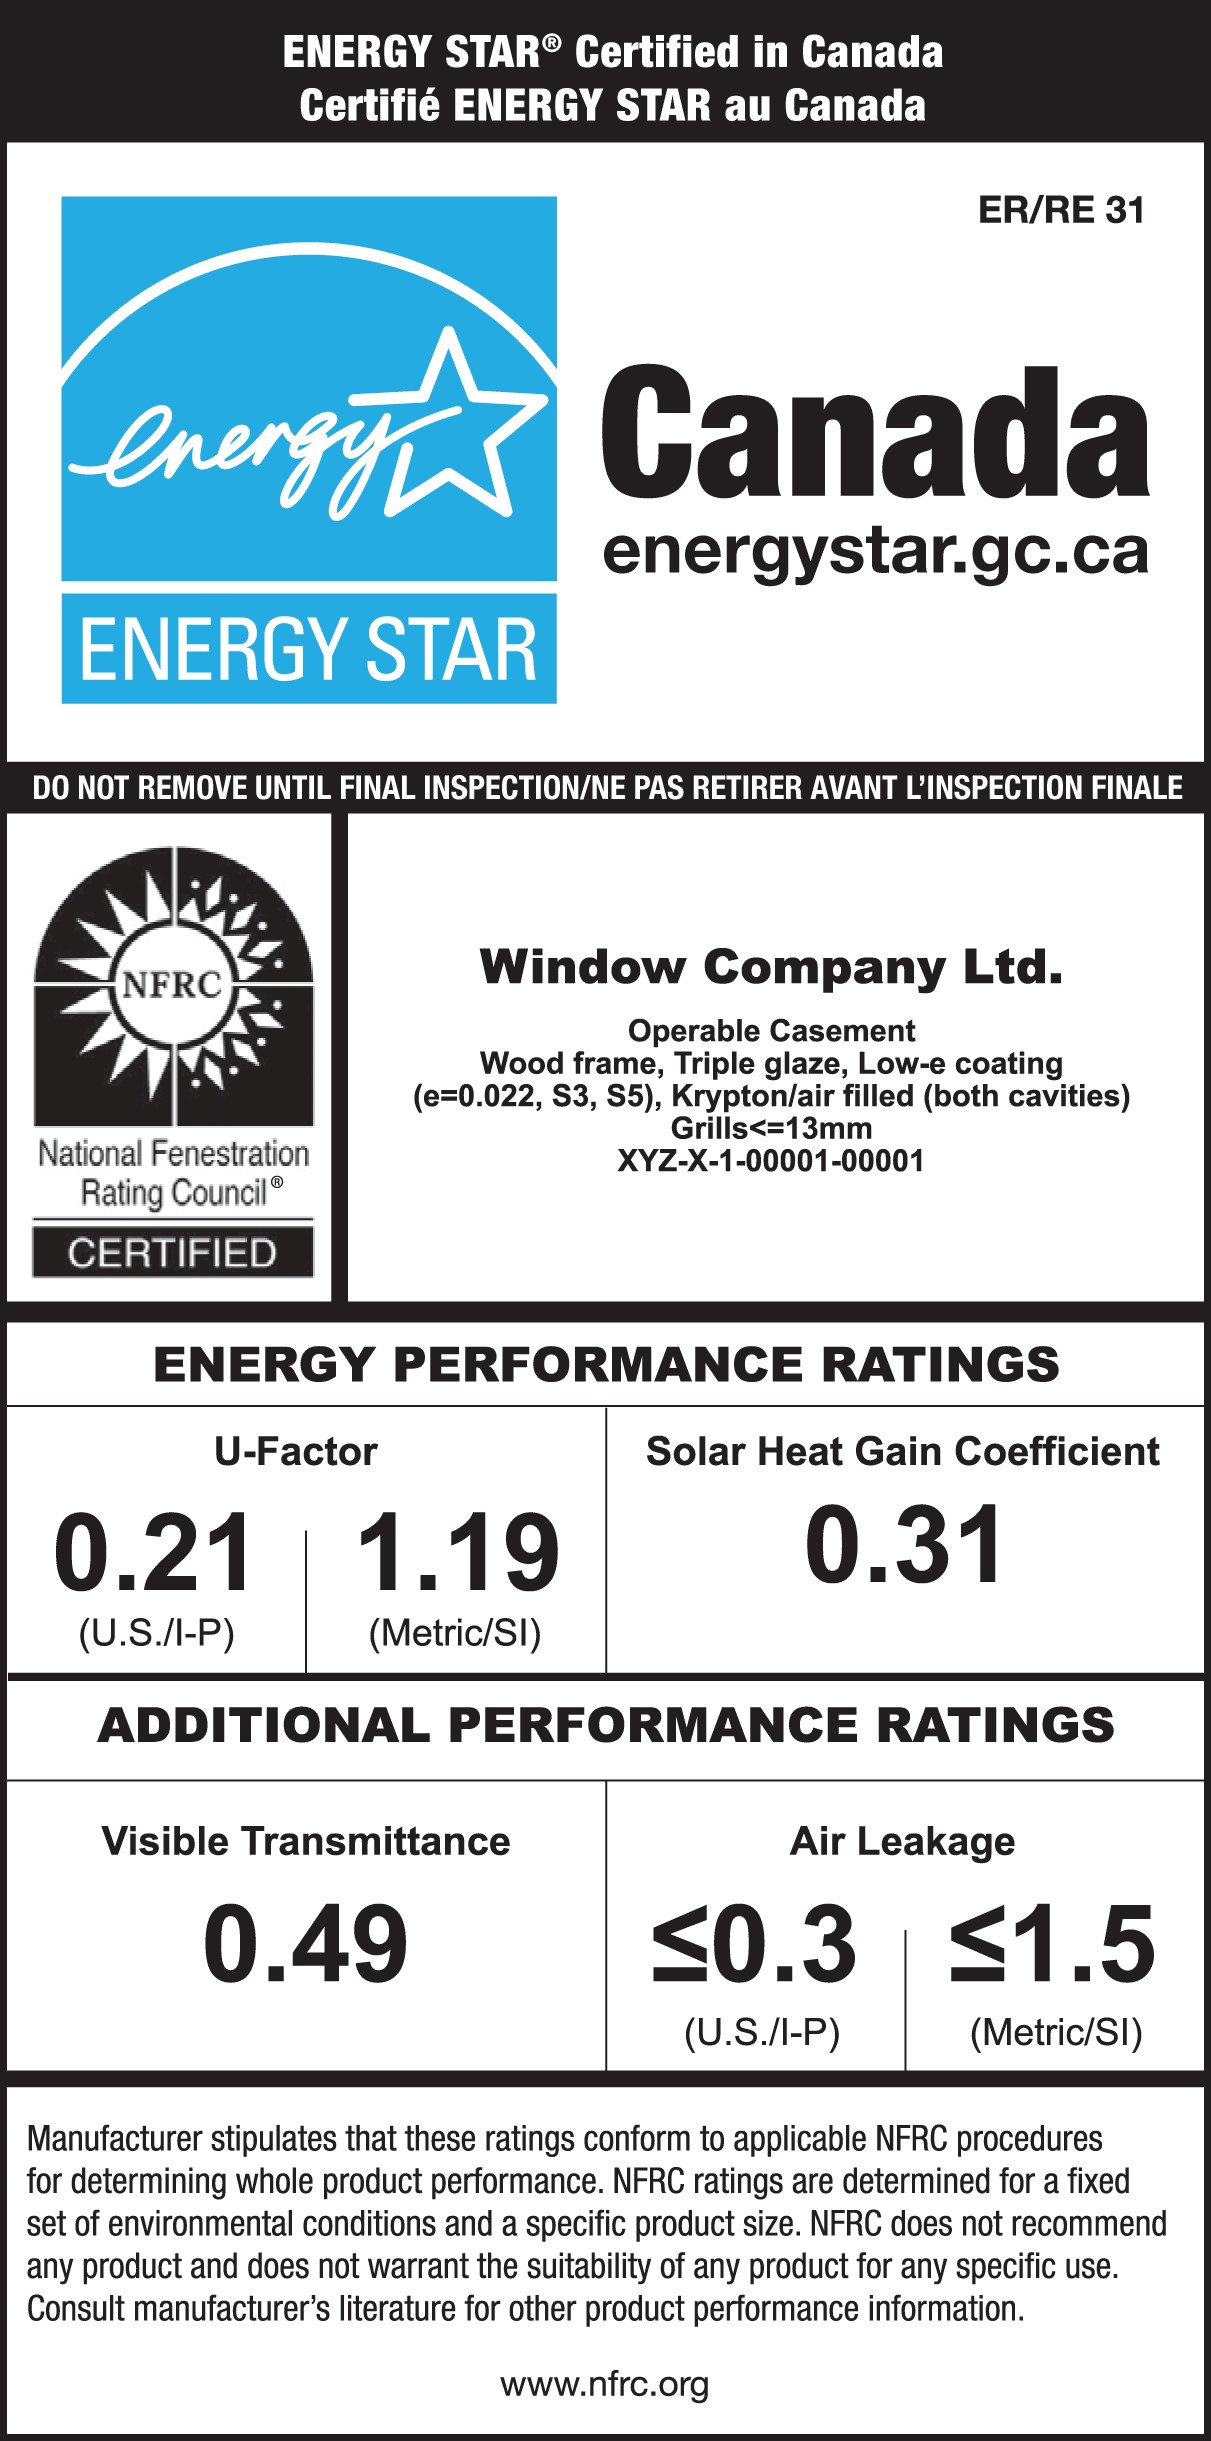 Sample ENERGY STAR / NFRC temporary label for a window. The ENERGY STAR portion has an ENERGY STAR certification mark and text indicating that the product is certified for all of Canada.  The NFRC portion has a NFRC certification mark and the product’s specific performance ratings, brand name and model description.